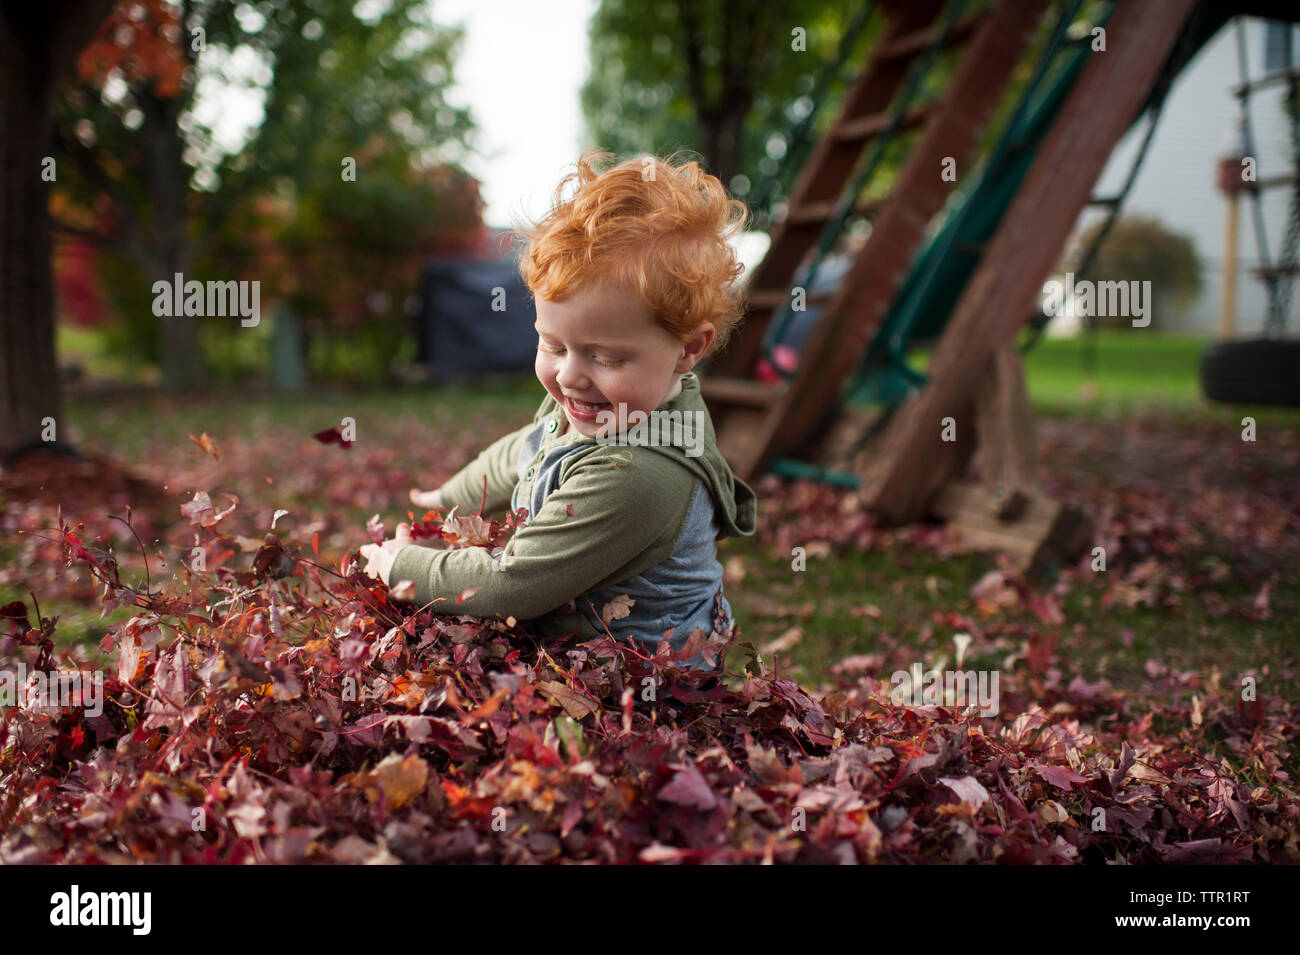 Sweet toddler boy smiles while playing in leaves in backyard Stock Photo